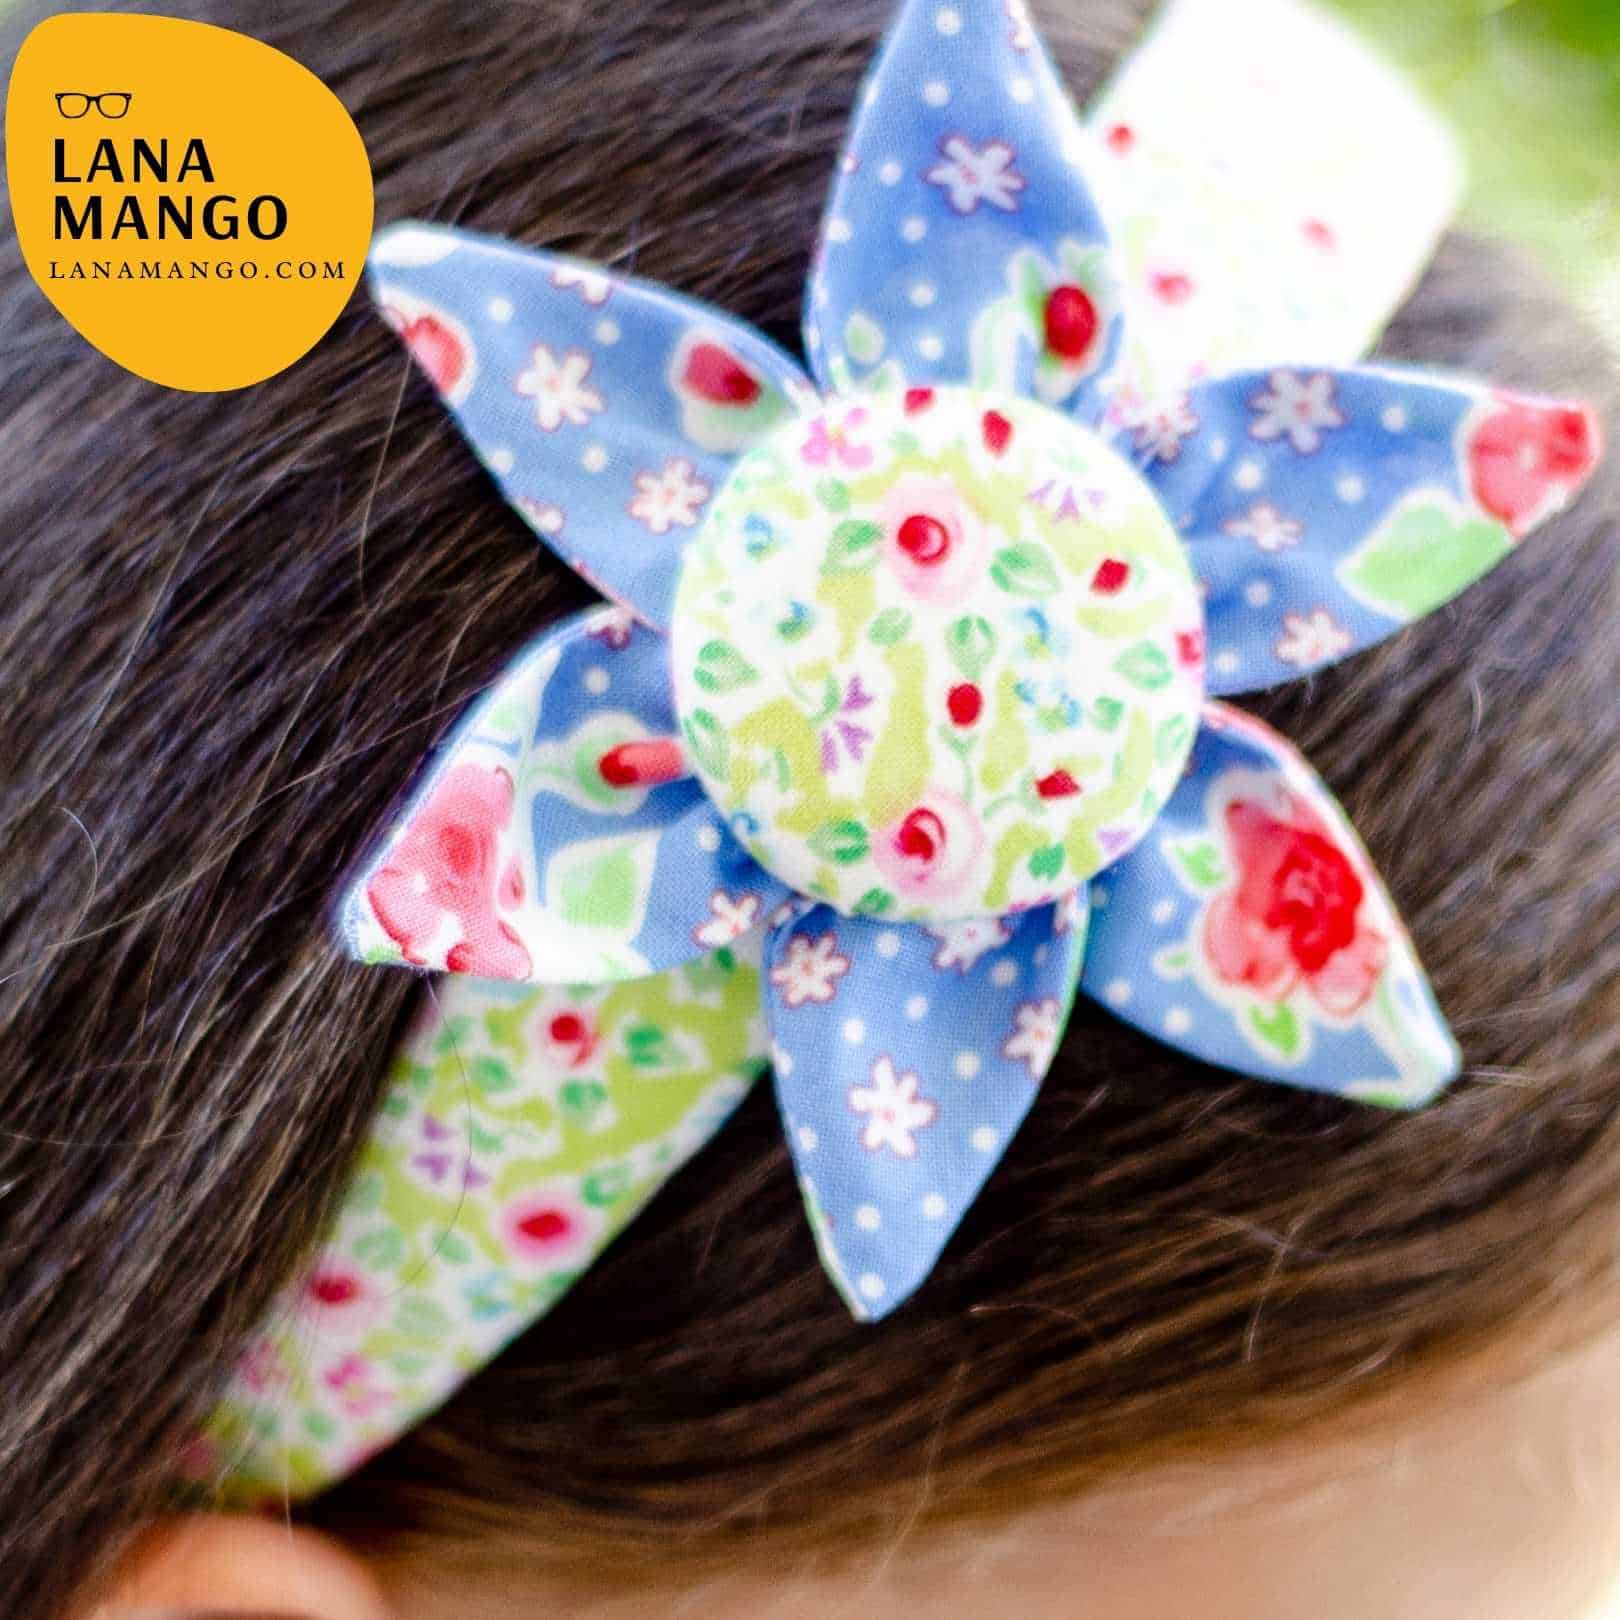 How to make headbands, easy ideas for handmade diy head bands and hairbands